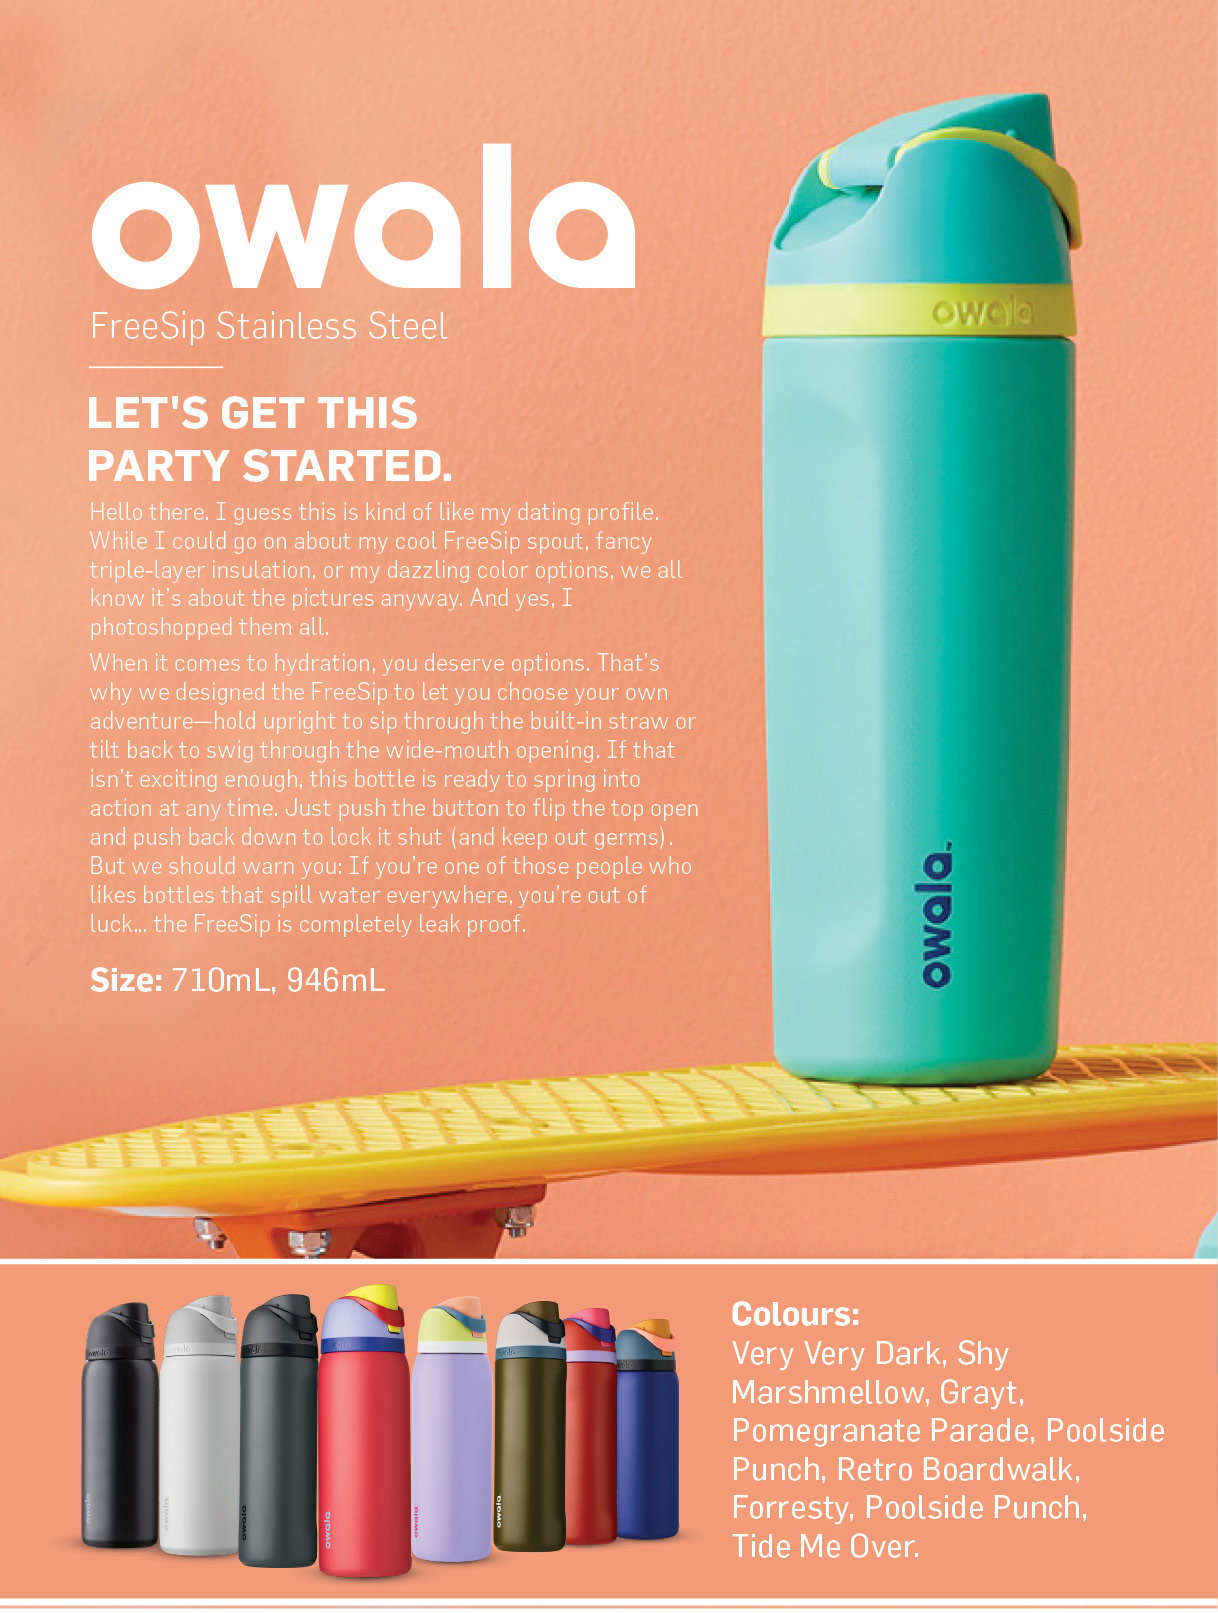 The latest Owala Freesip 32oz - Retro Boardwalk owala version is now  available at Fantastic Prices